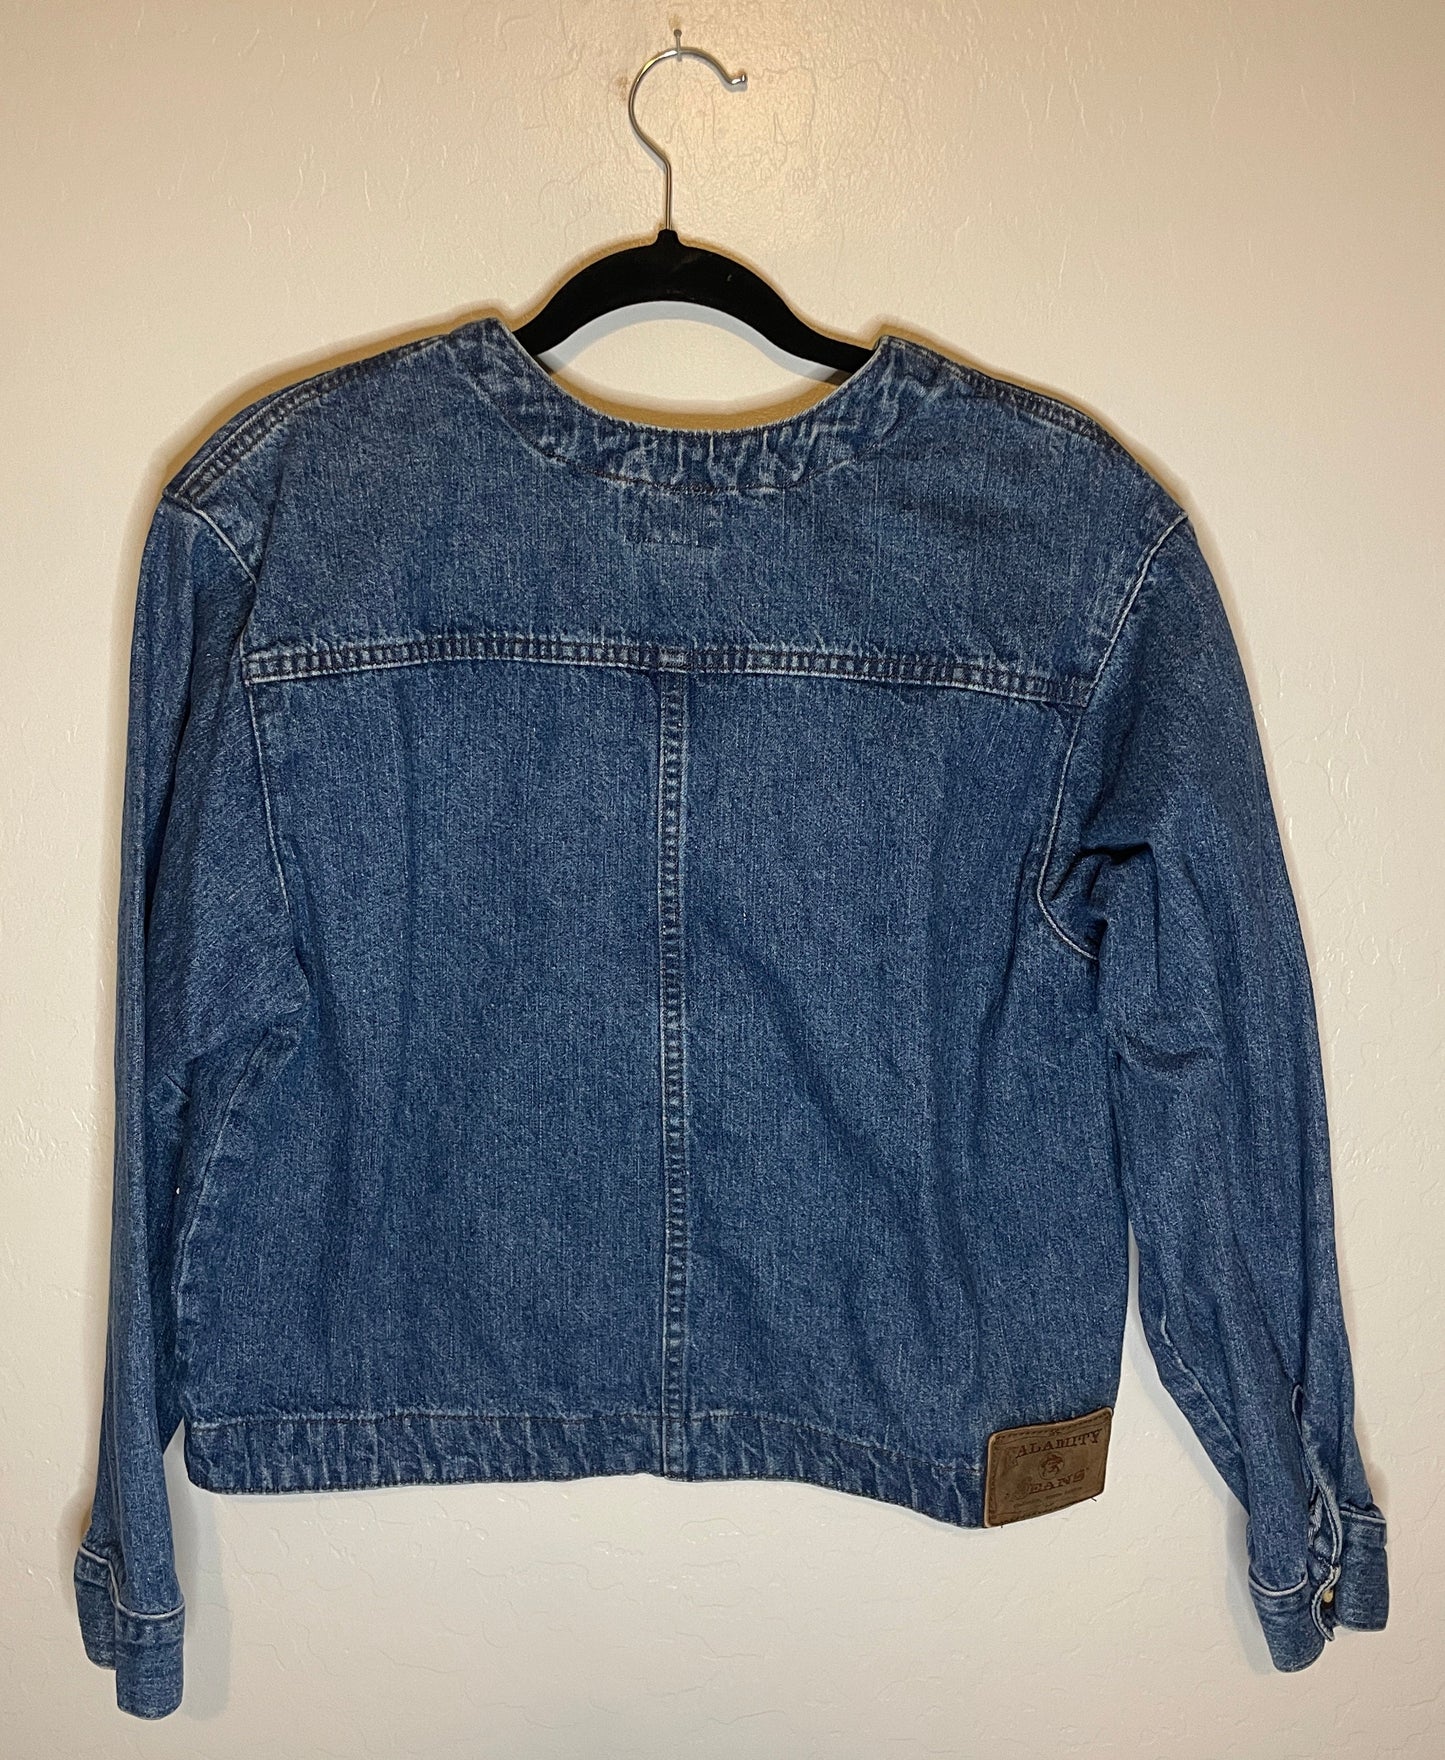 90s Denim Jacket with Suede Lining